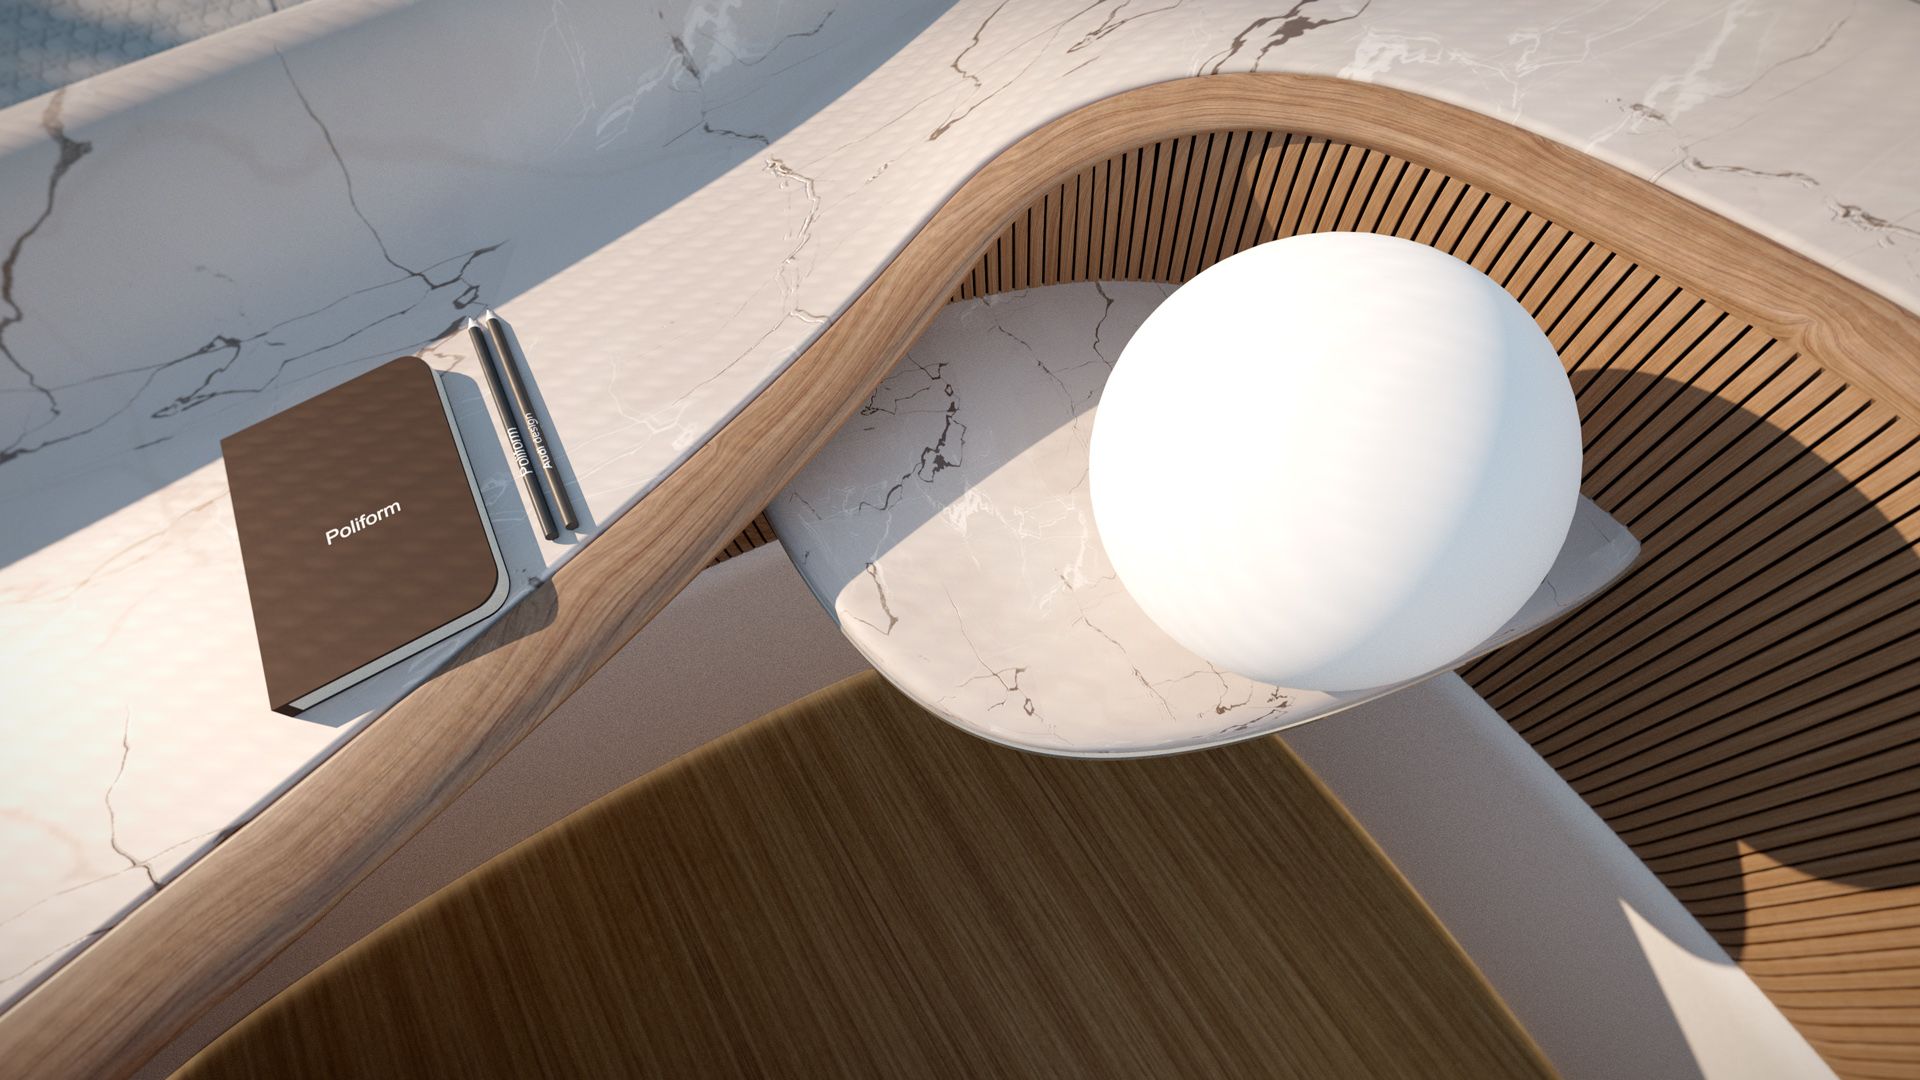 On a table in Poliform's interior design for the Audi ur-bansphere concept lies a notepad with a pen and a round lamp.